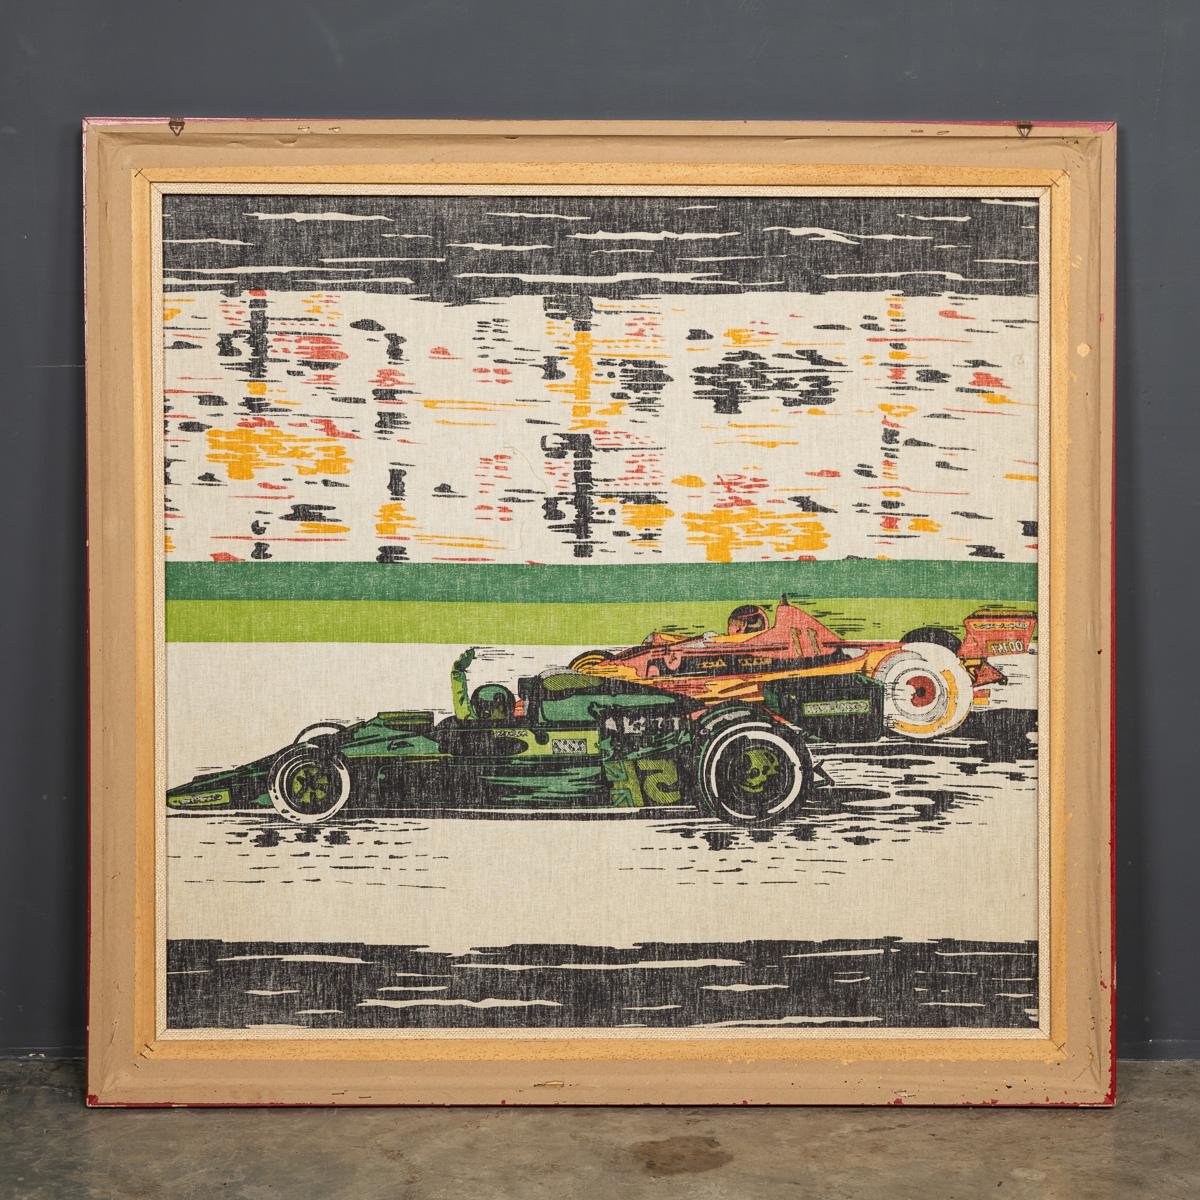 Unknown 20th Century Silk Screen Print of Racing F1 Cars on Track Poster, c.1970 For Sale